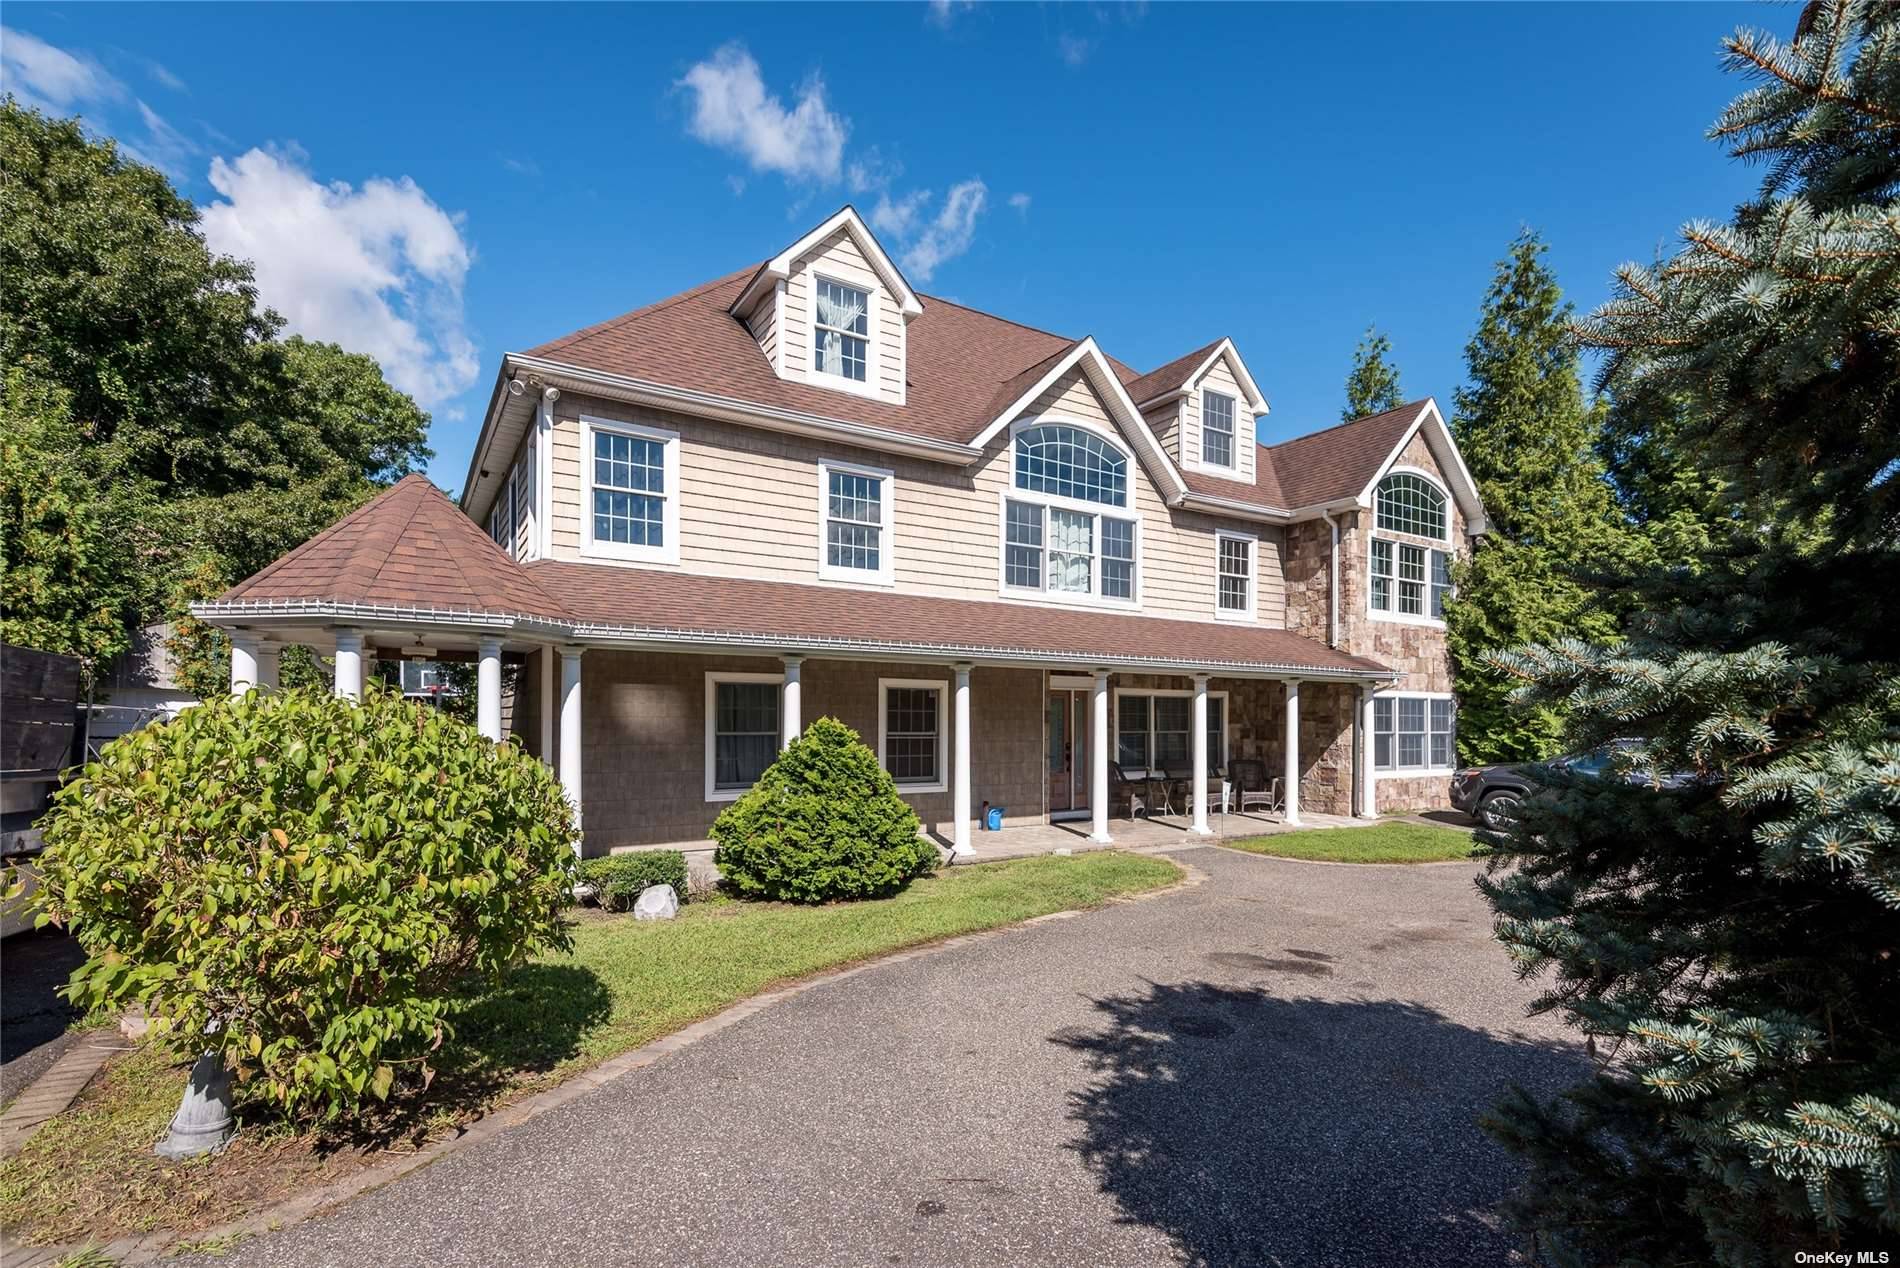 This impeccable renovated and maintained 4, 900 sq ft colonial boasts a country club backyard an entertainers dream w IG heated salt water pool, outdoor kitchen, outdoor covered porch cabana, ...